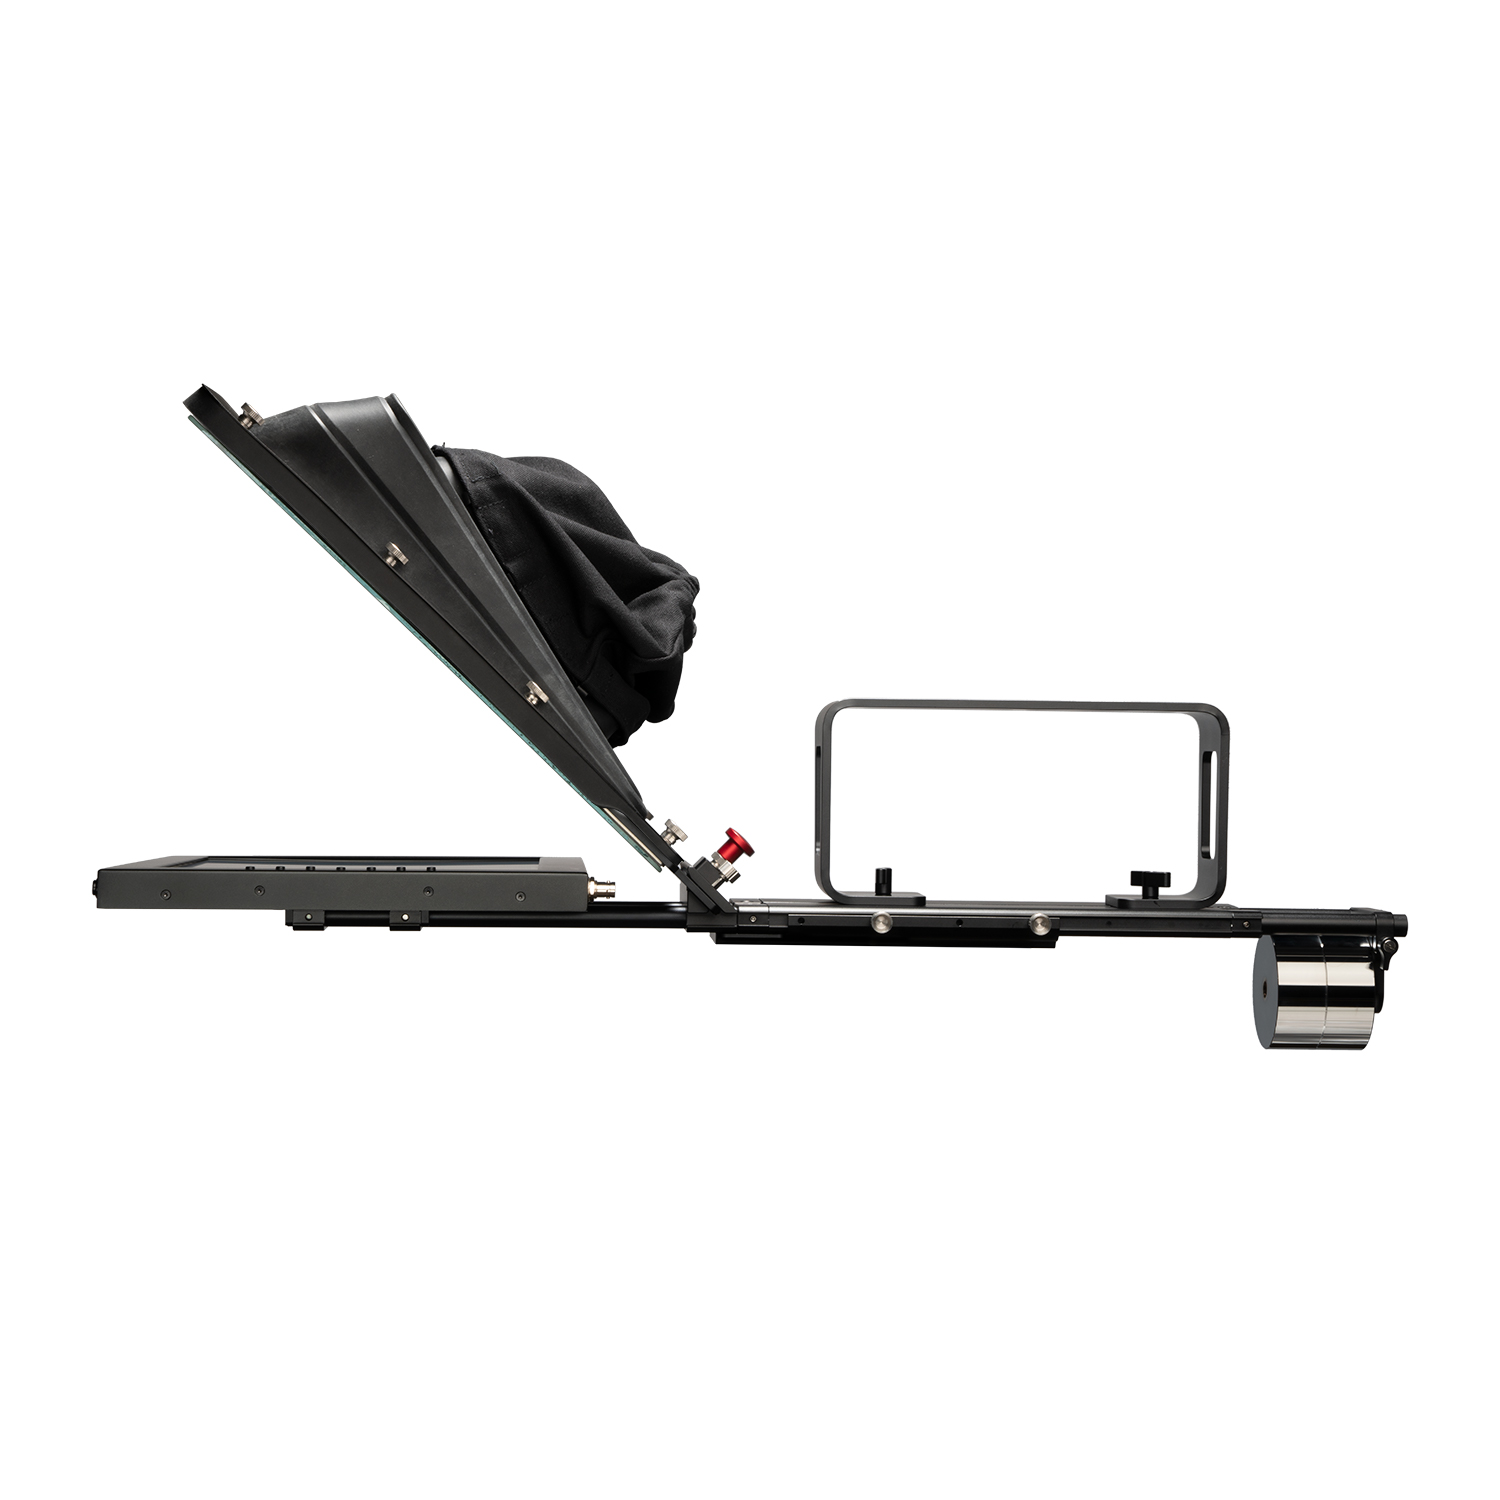 Ikan Professional High-Bright Teleprompter with Talent Monitor Kit (17 ")